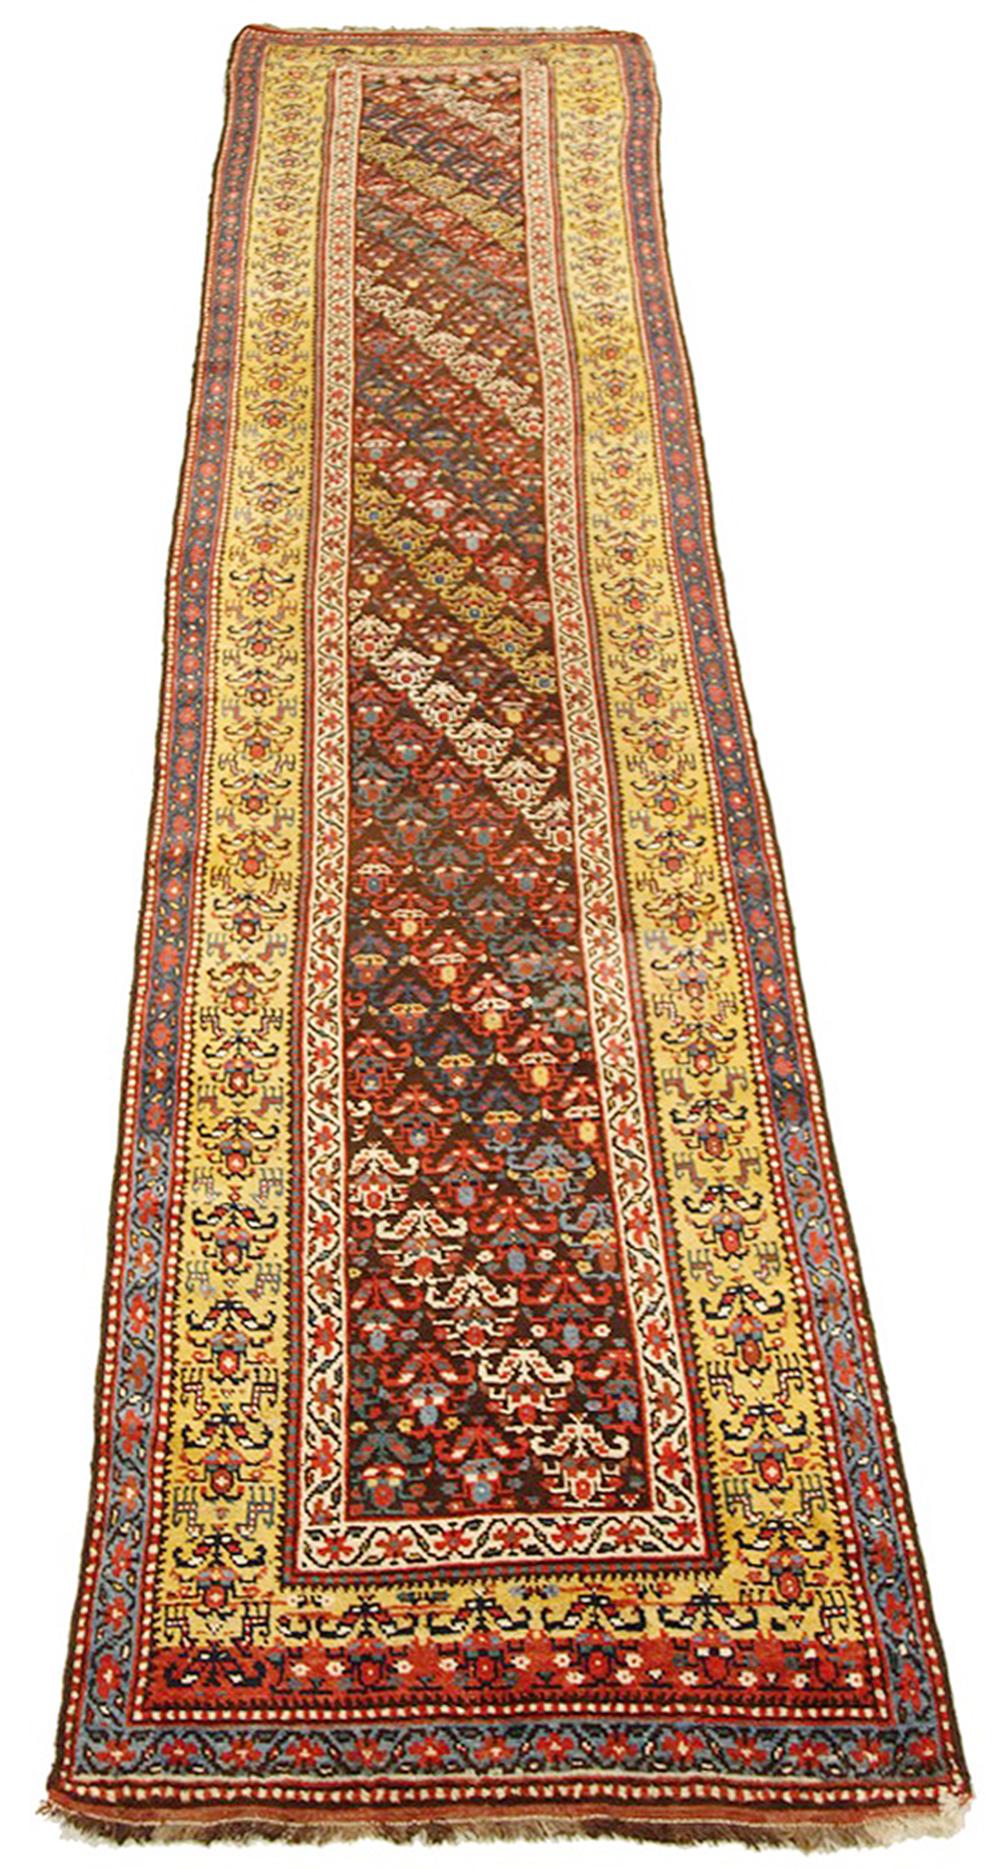 Antique Azerbaijan runner rug handwoven from the finest sheep’s wool and colored with all-natural vegetable dyes that are safe for humans and pets. It’s a traditional Azerbaijani design featuring mixed floral and geometric details over a deep yellow